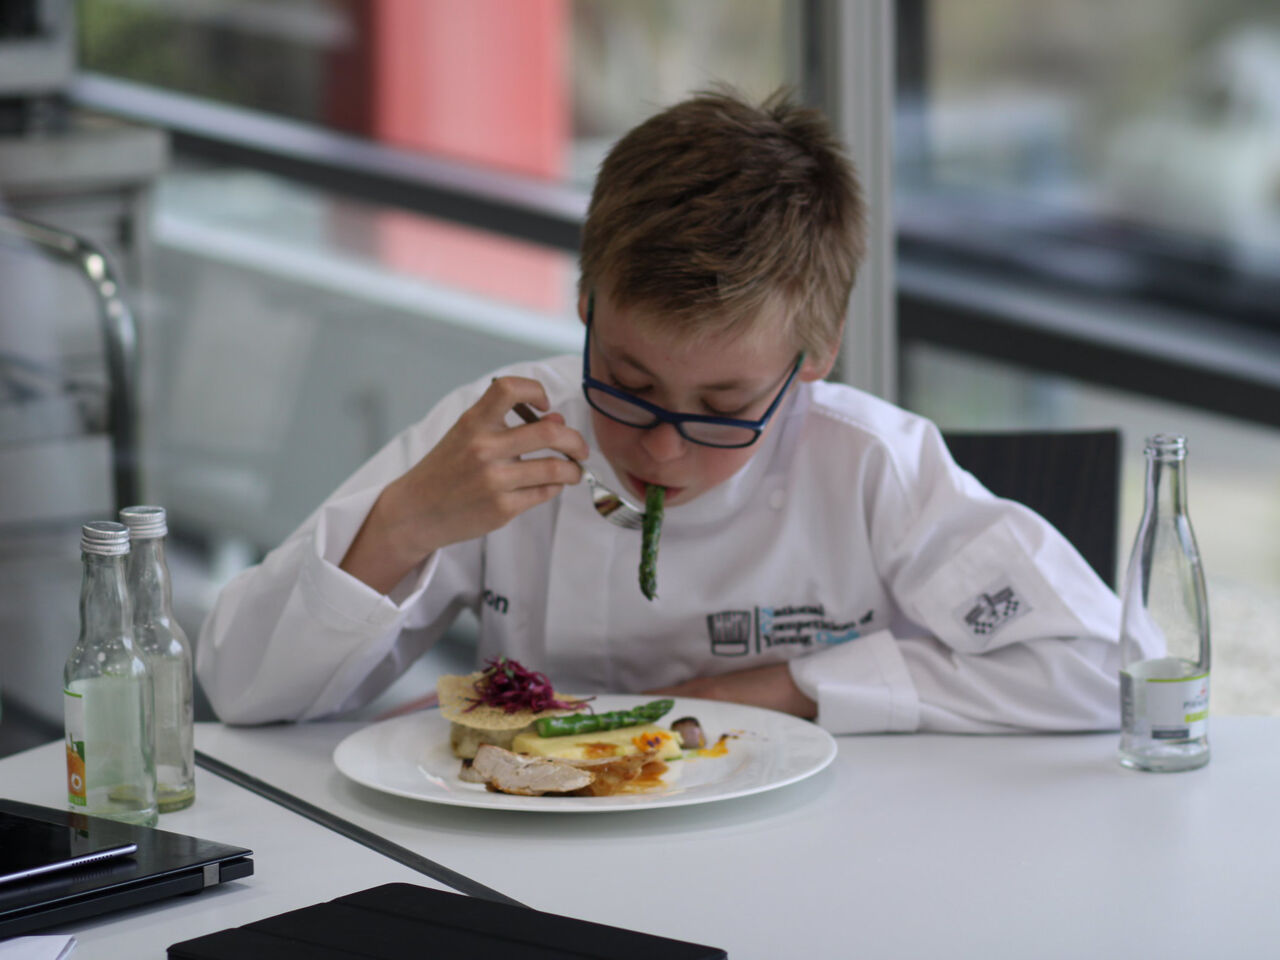 One of the two child judges tasting a dish during the final challenge of National Skills Competition of Young Chefs in Germnay.